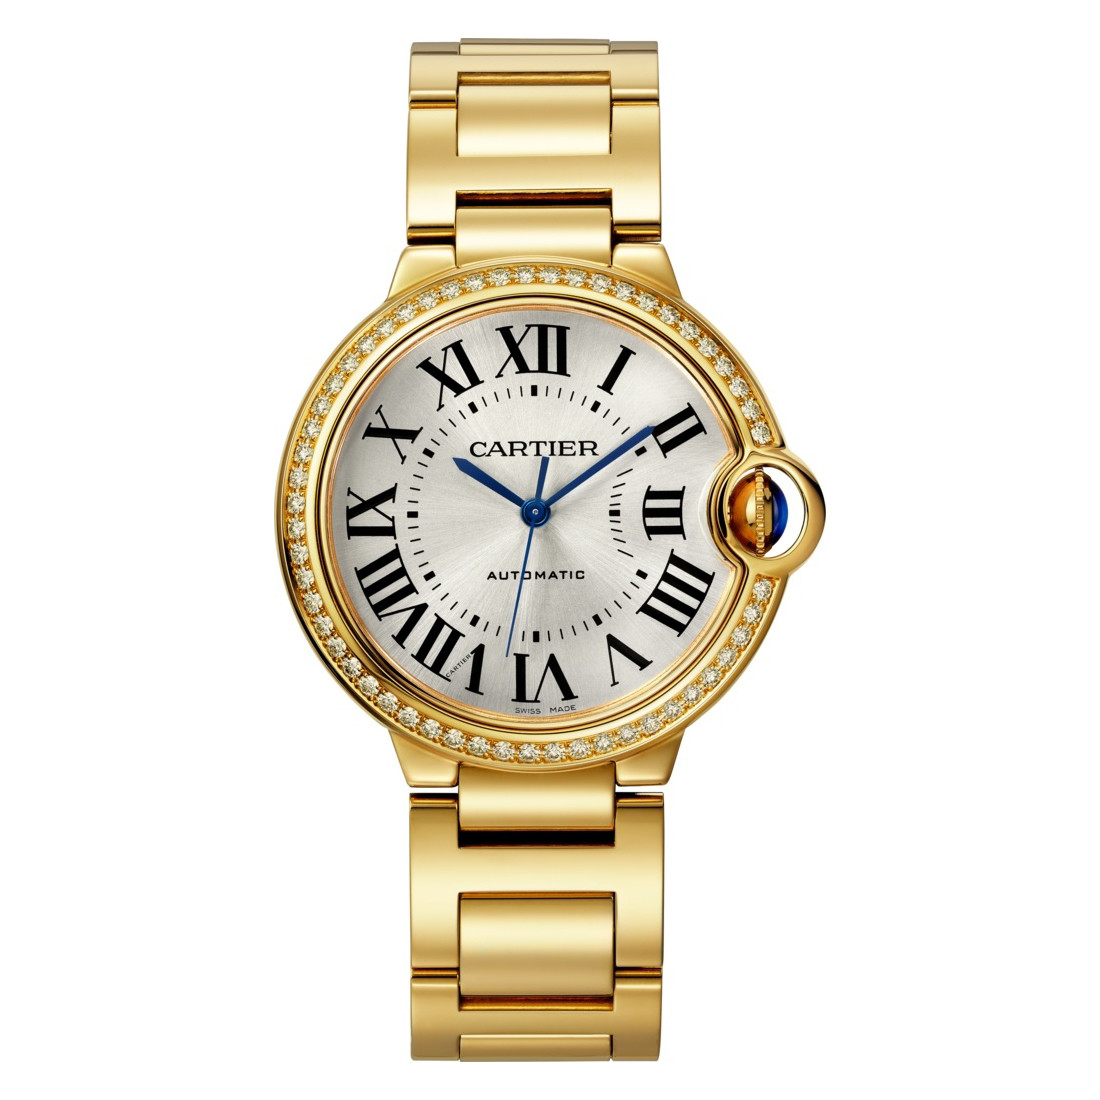 Ballon Bleu De Cartier in Yellow Gold with Diamonds Bezel on Brown Alligator Leather Strap with Silver Dial